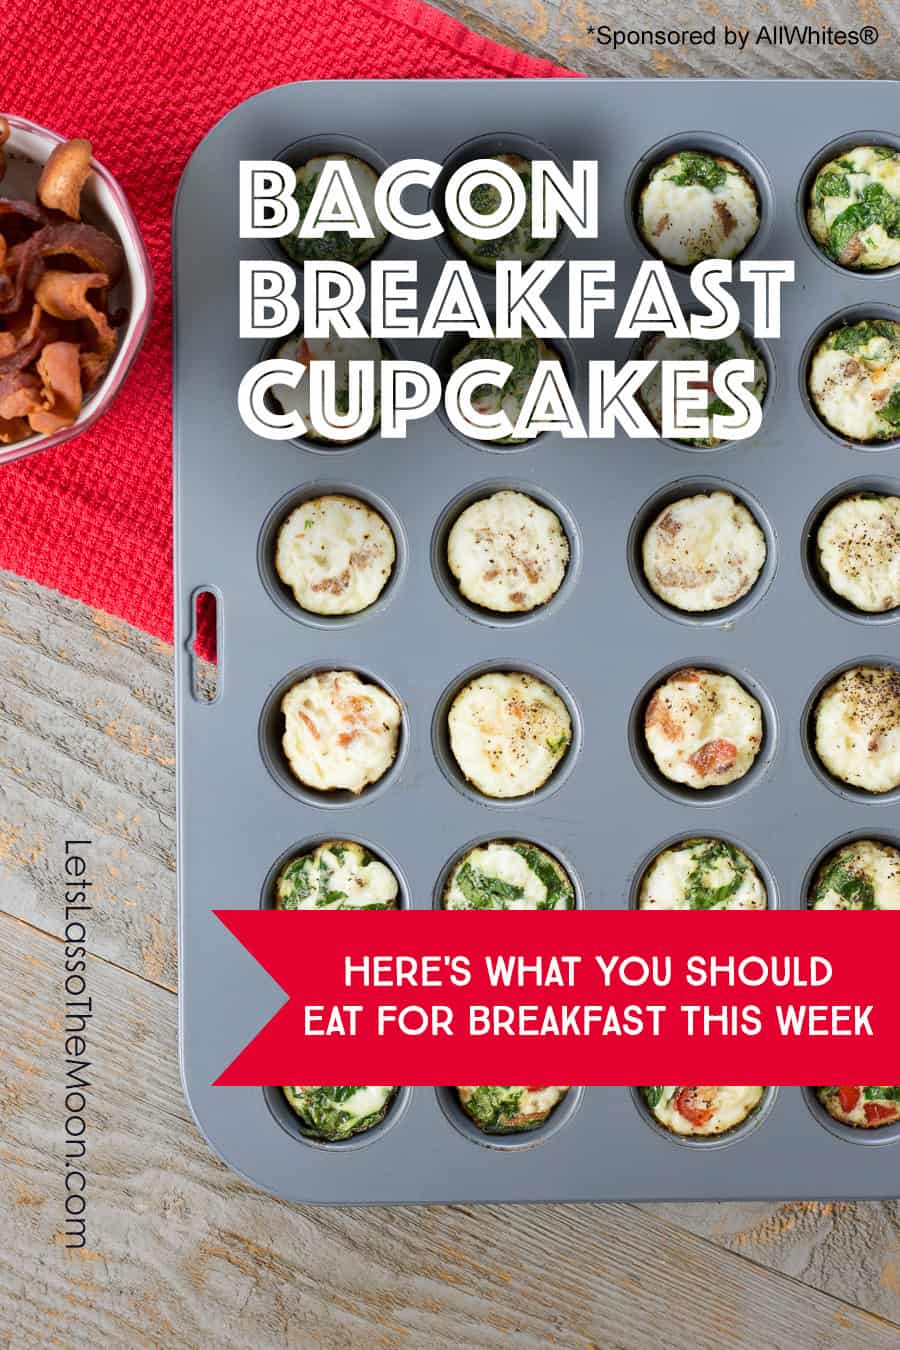 Here are 5 insanely easy breakfast recipes that will give you a morning boost. This Bacon Breakfast Cupcakes recipe is packed full of protein and is a quick on-the-go breakfast snack. You can make one batch to last a full week. *Crazy easy way to start your day with eggs